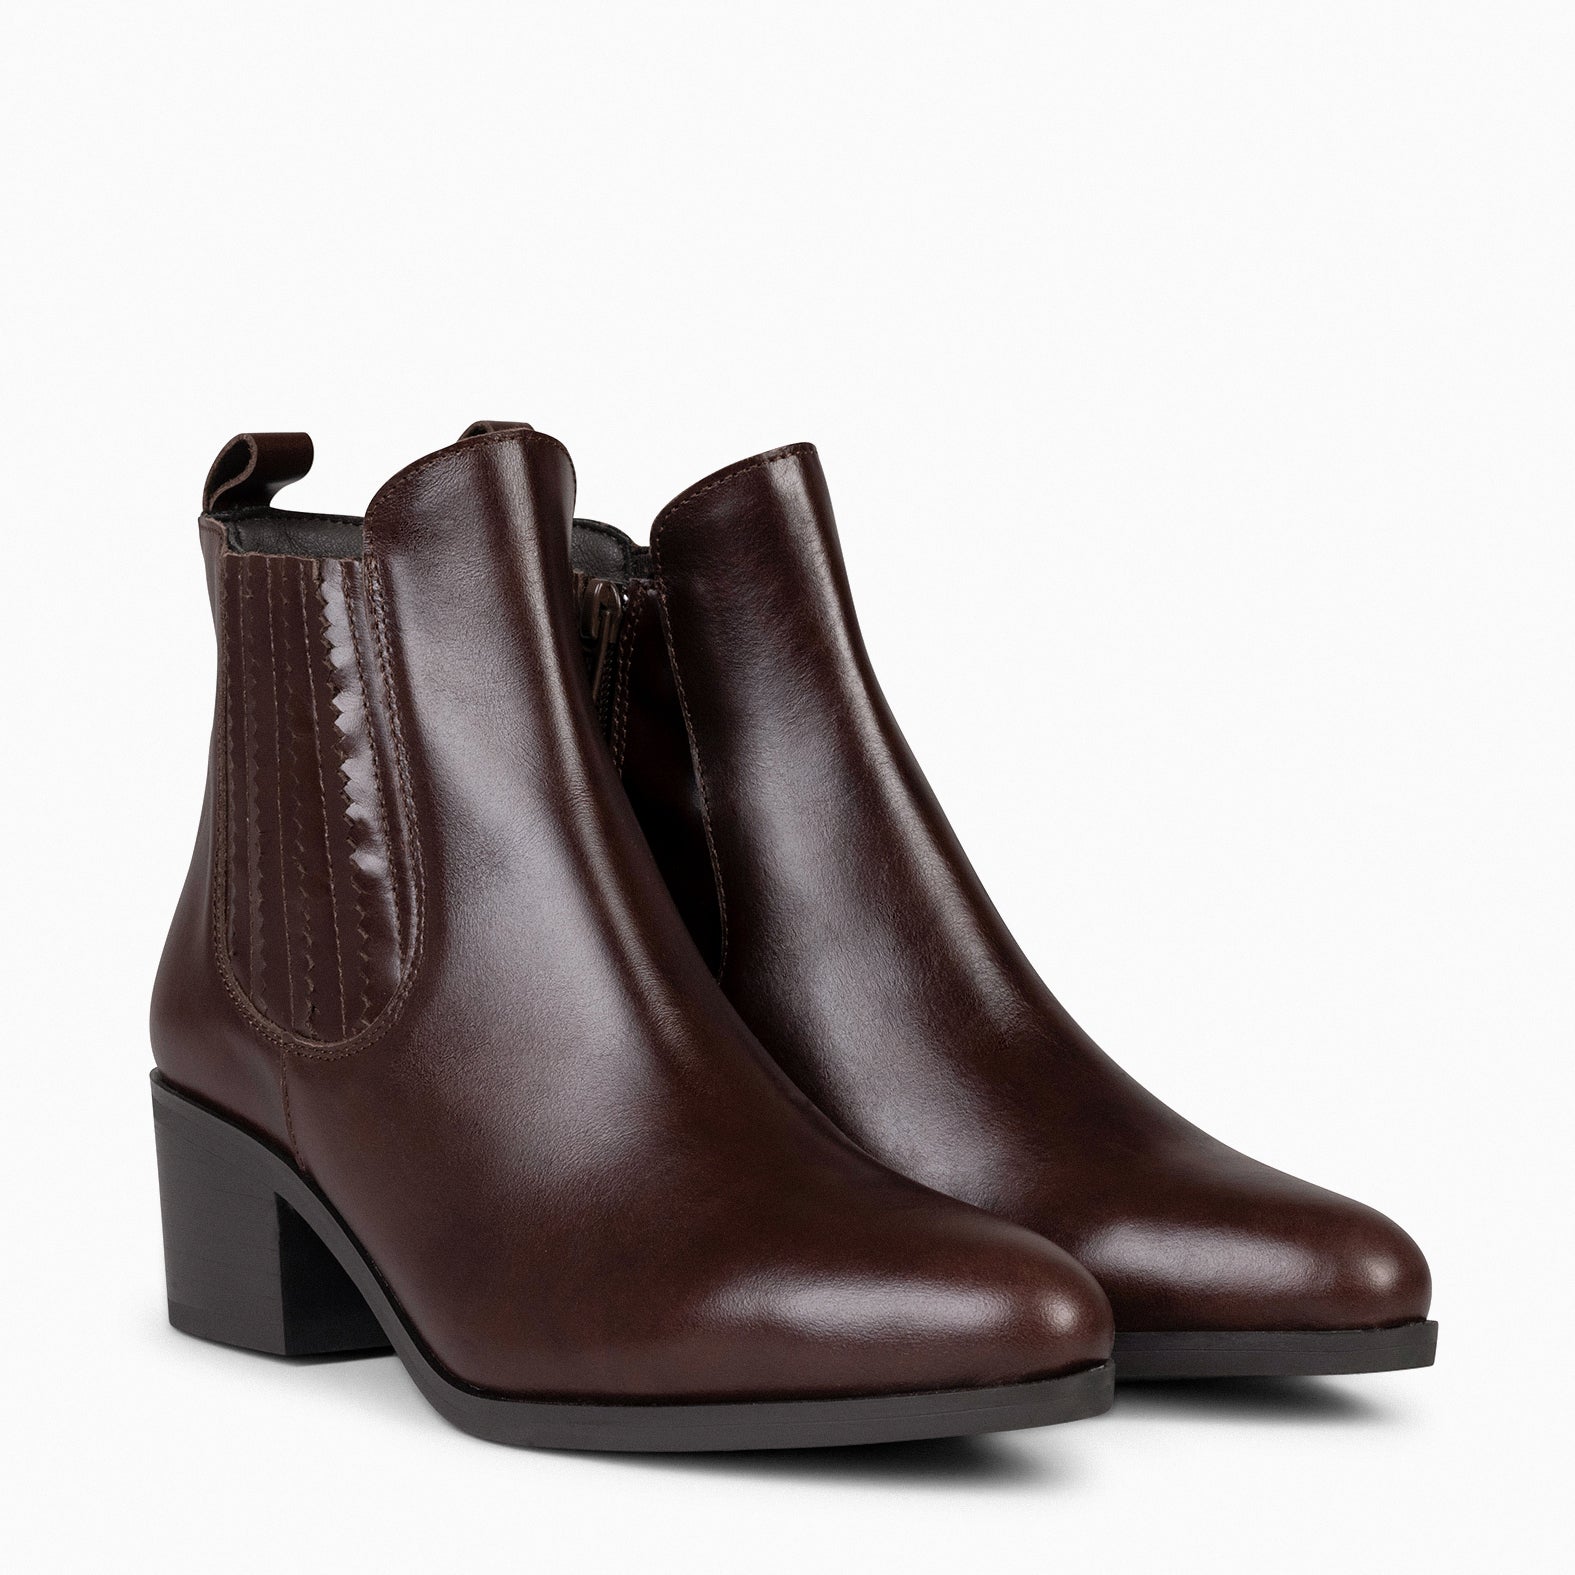 SHELLY – BROWN Country Women  Booties